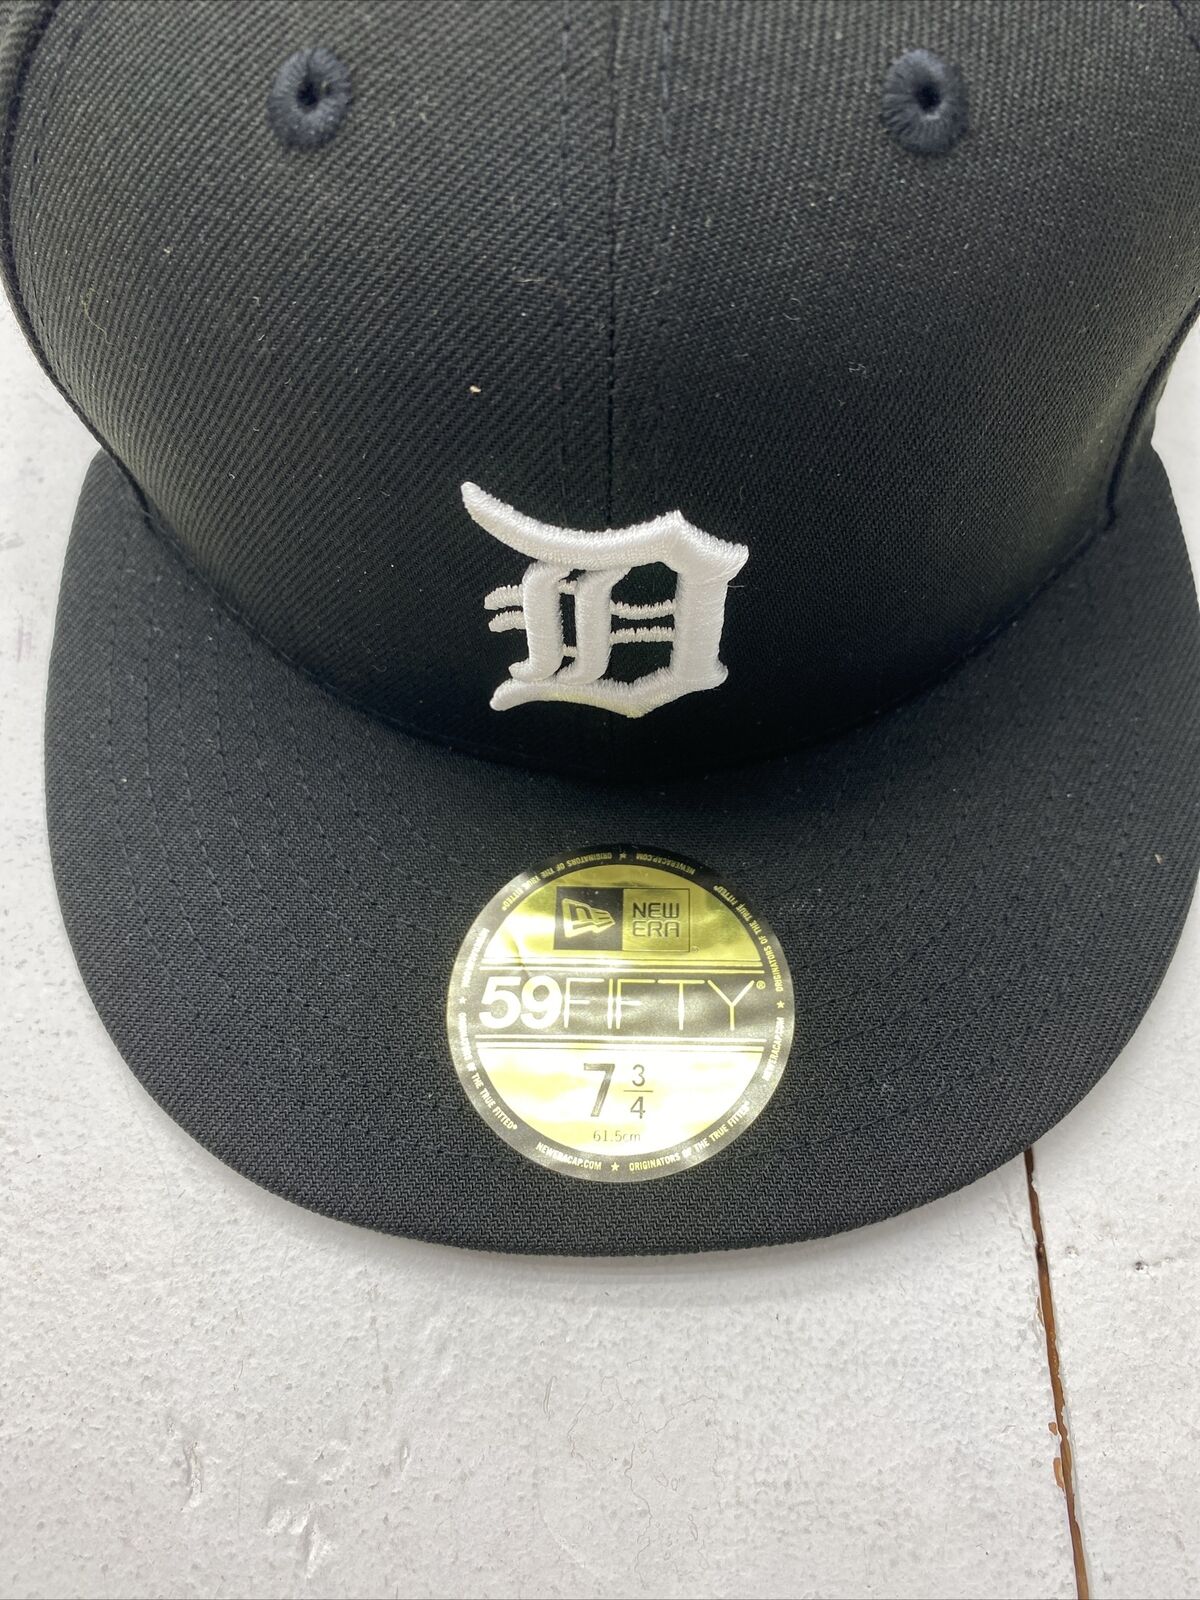 Detroit Tigers New Era 59FIFTY Fitted Hat - Royal